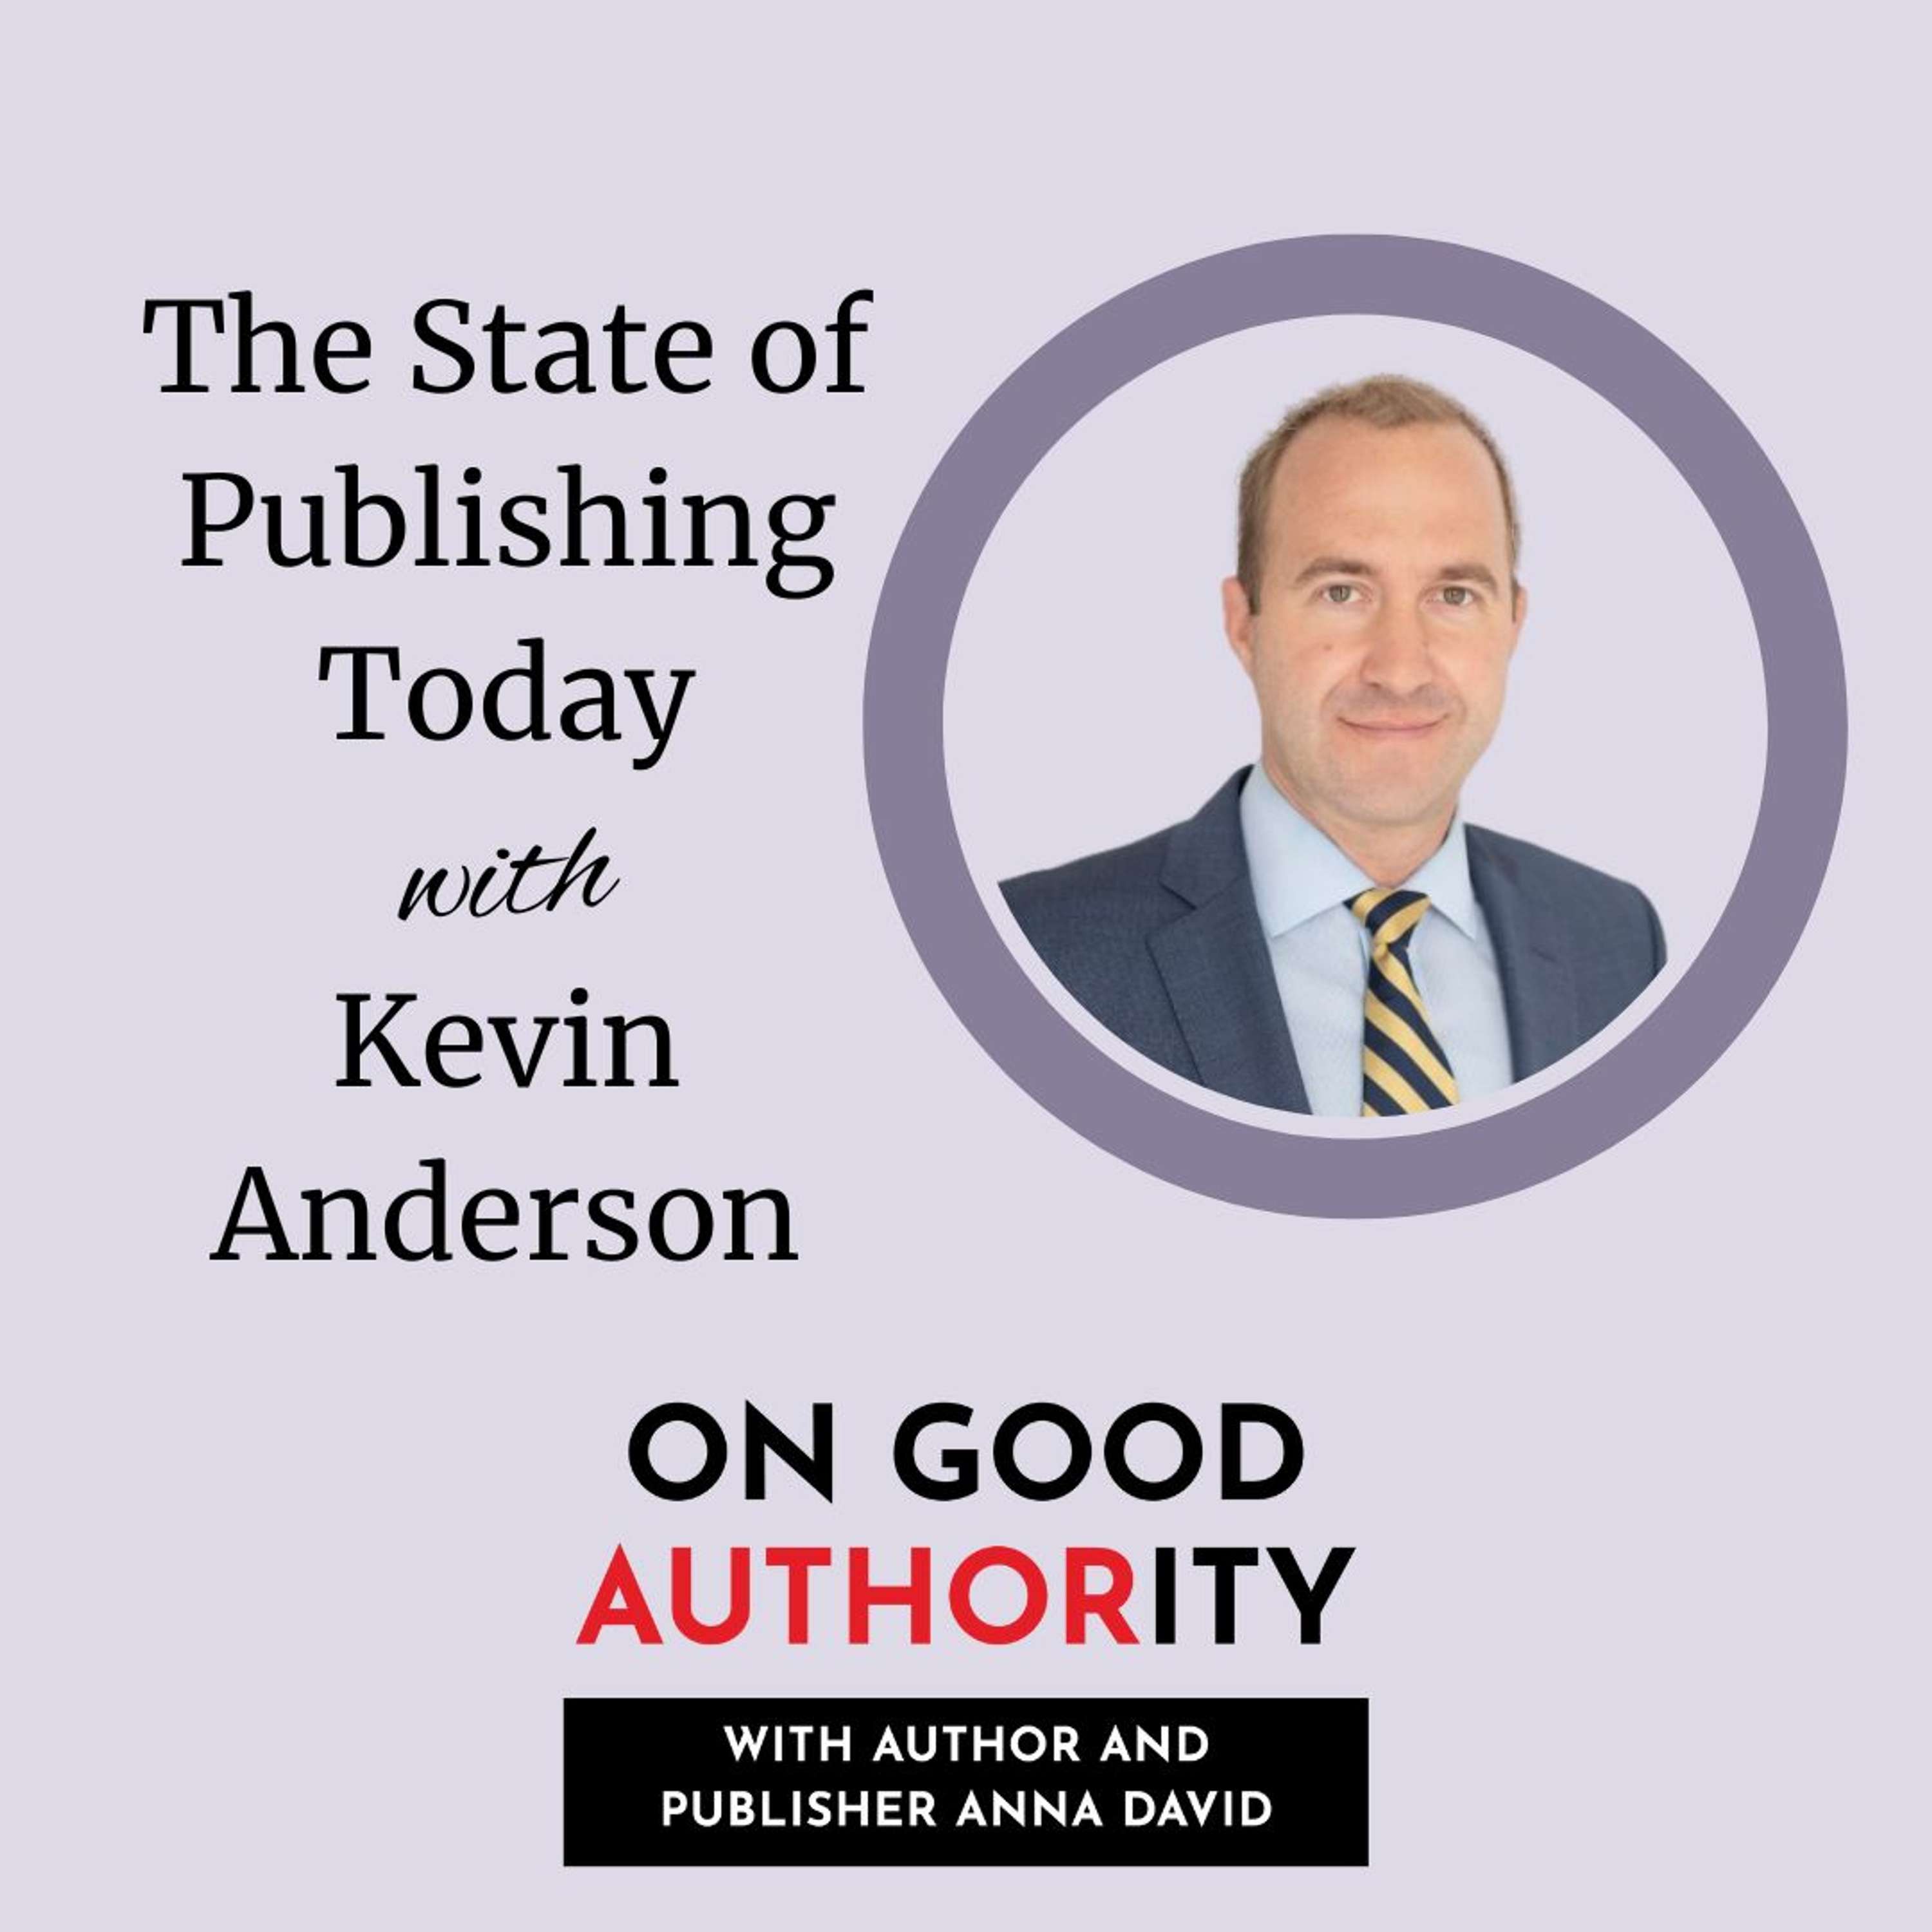 The State of Publishing Today with Kevin Anderson